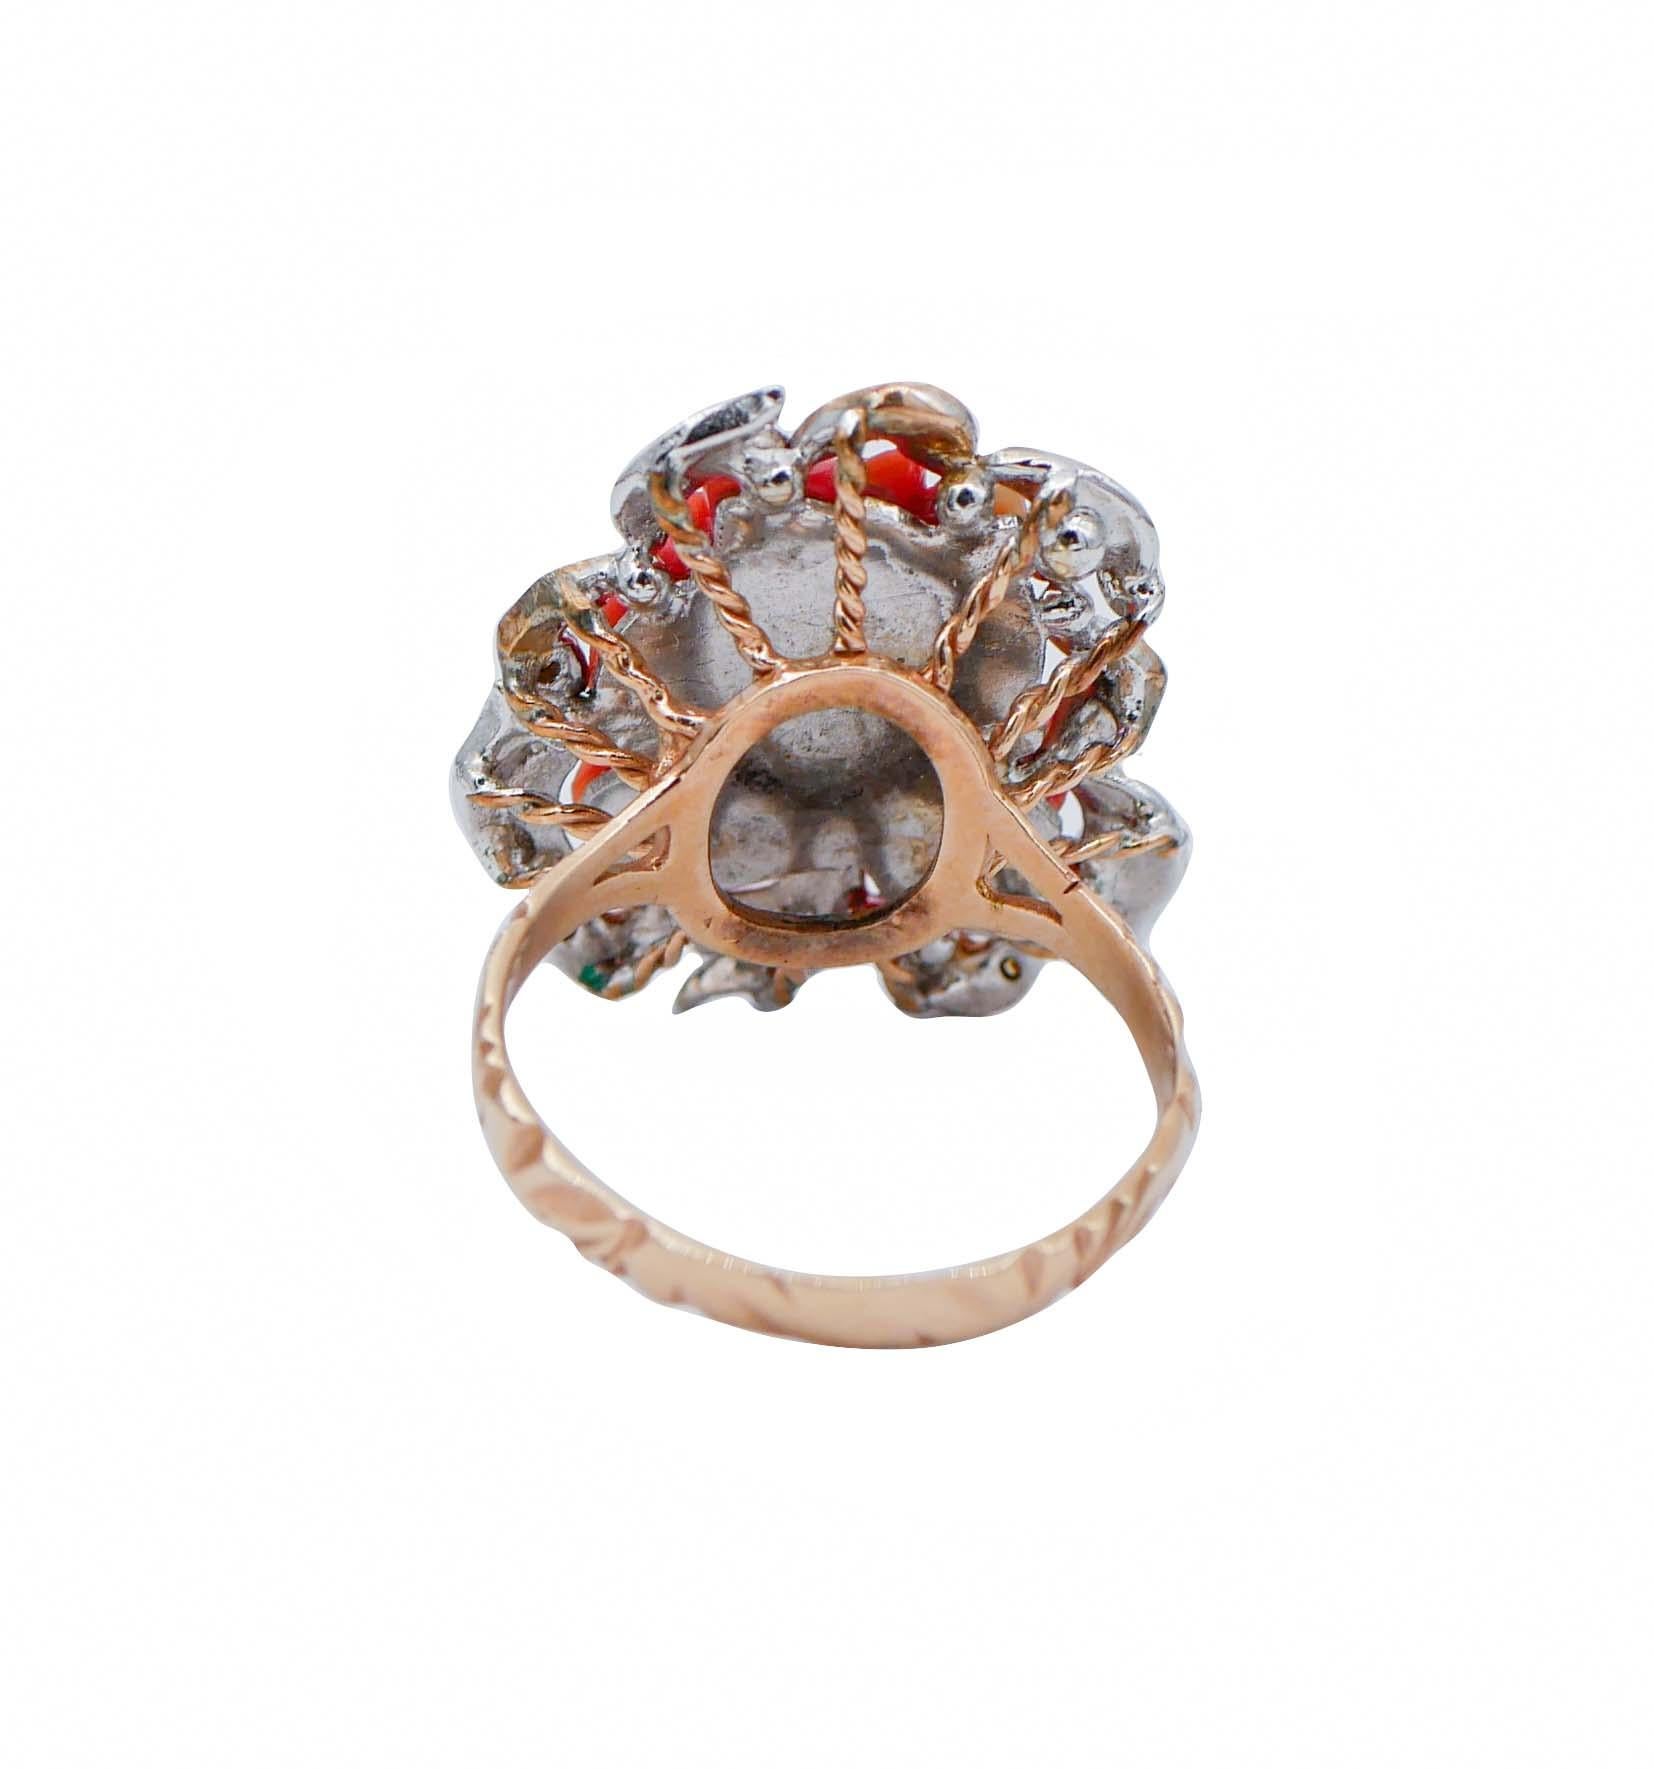 Retro Coral, Fancy and White Diamonds, Pearls, 14 Karat White and Rose Gold Ring For Sale